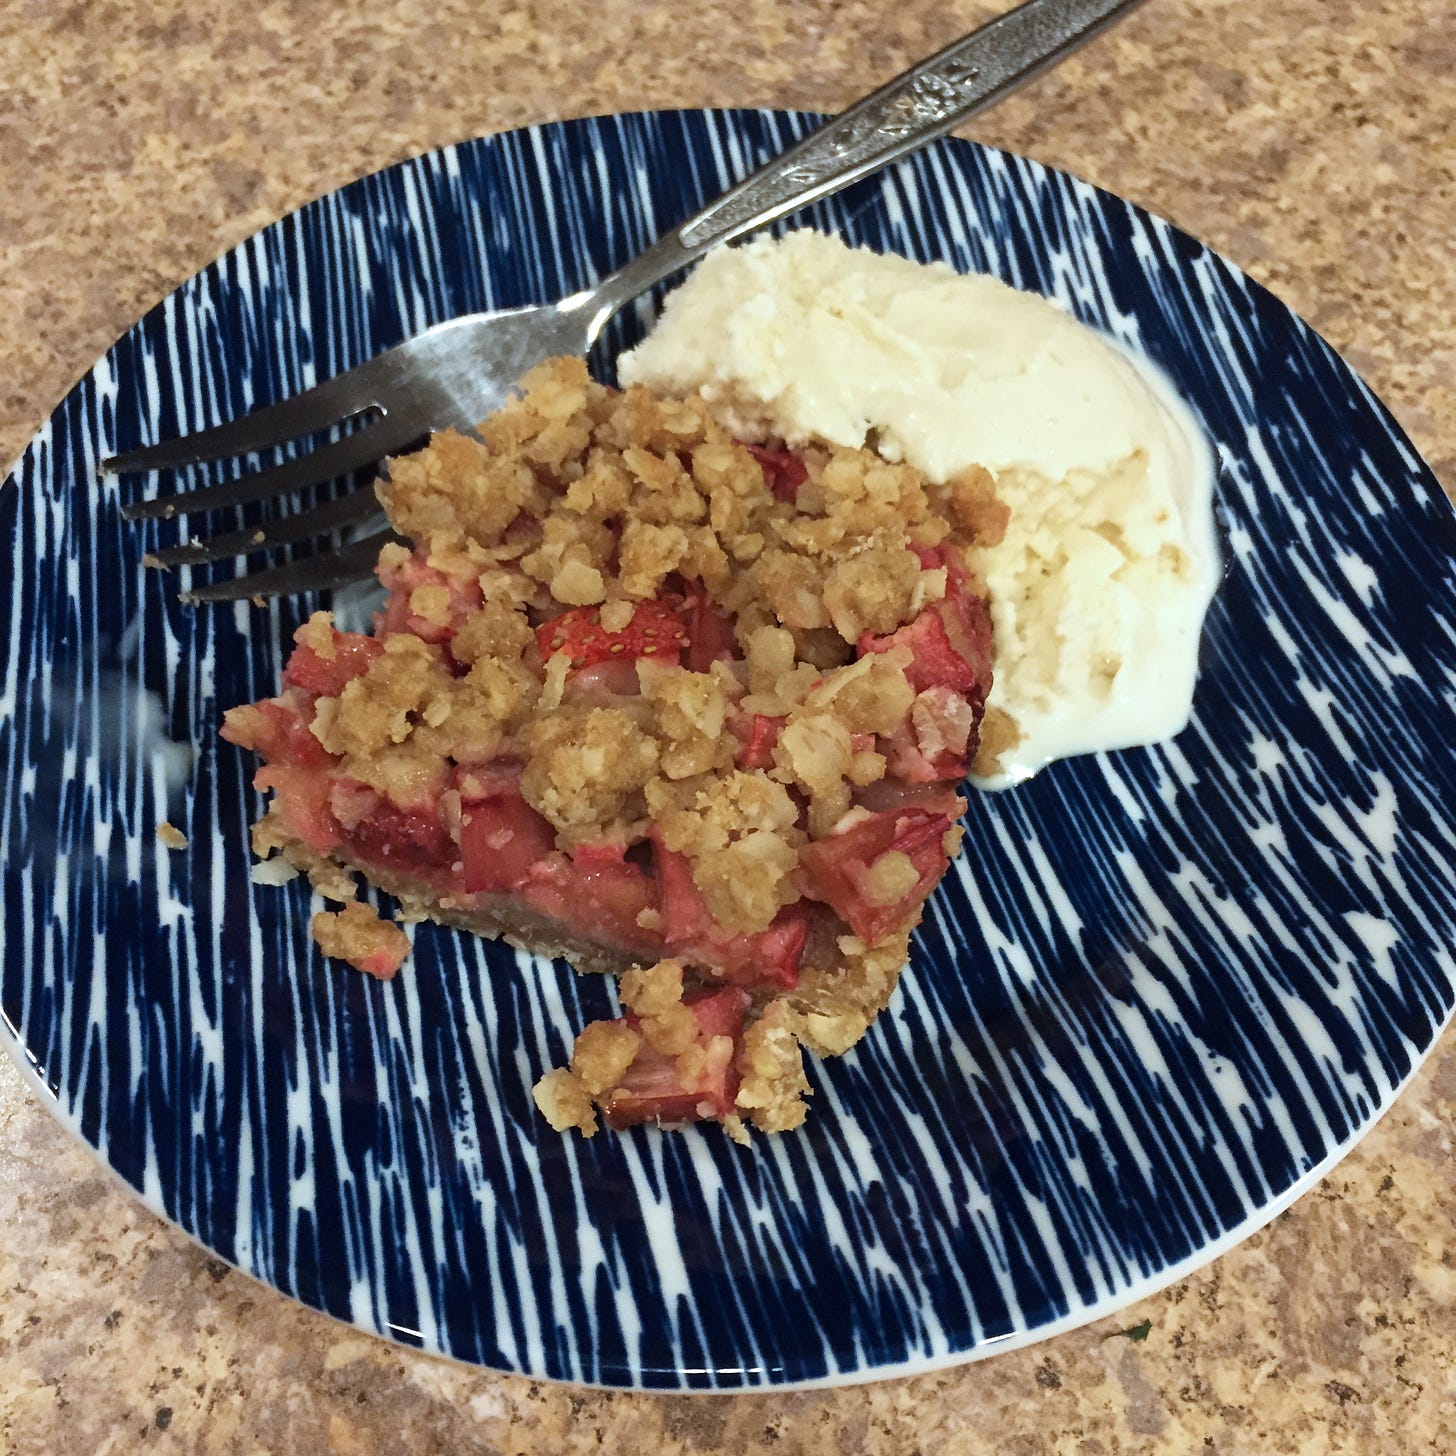 a square of strawberry rhubarb crisp, crumbling at the edges, next to a scoop of ice cream, on a blue striped plate.